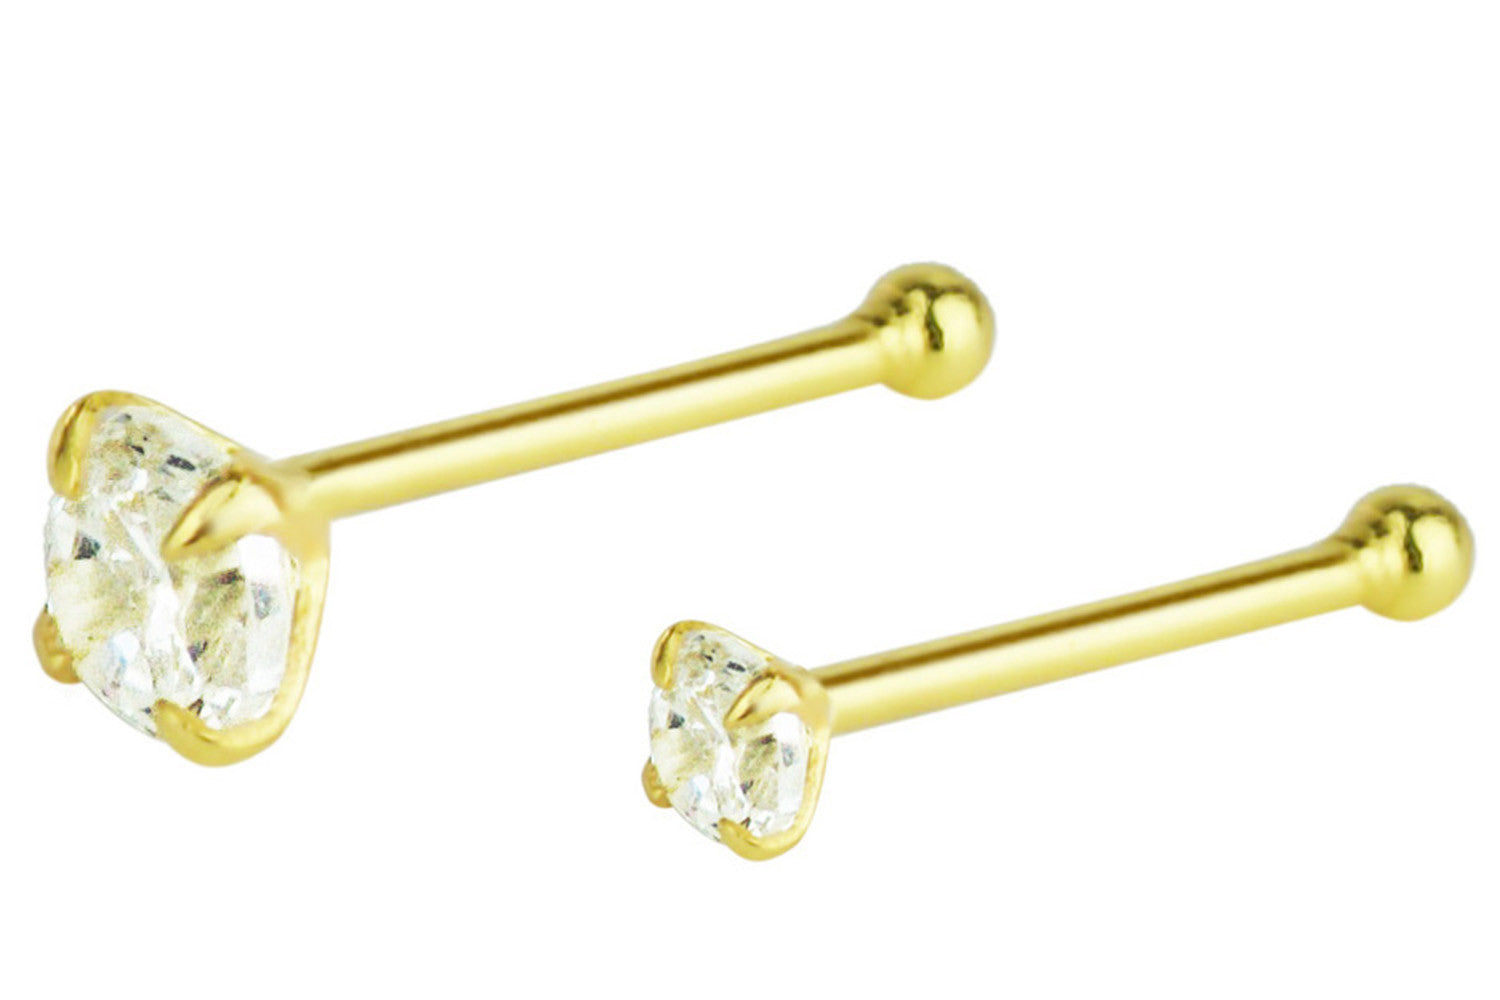 This set of 18kt Gold Plated Sterling Silver nose studs includes one 1.5 mm CZ crystal stud and one 2.5 mm CZ crystal stud. These 22 gauge studs are hypoallergenic.